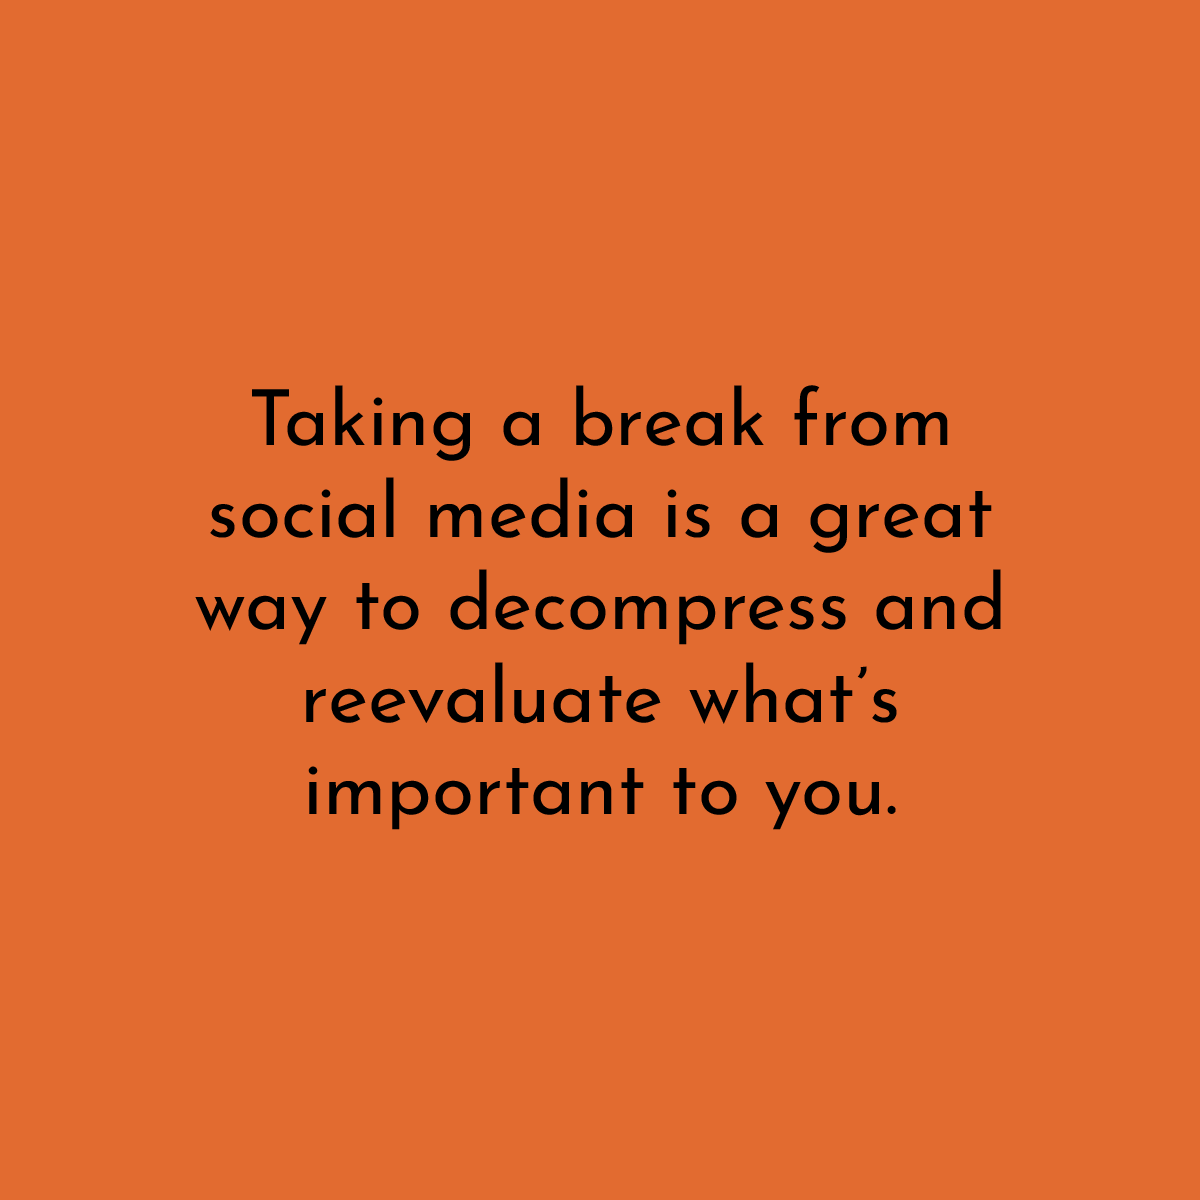 Taking a break from social media is a great way to decompress and reevaluate what's important to you.